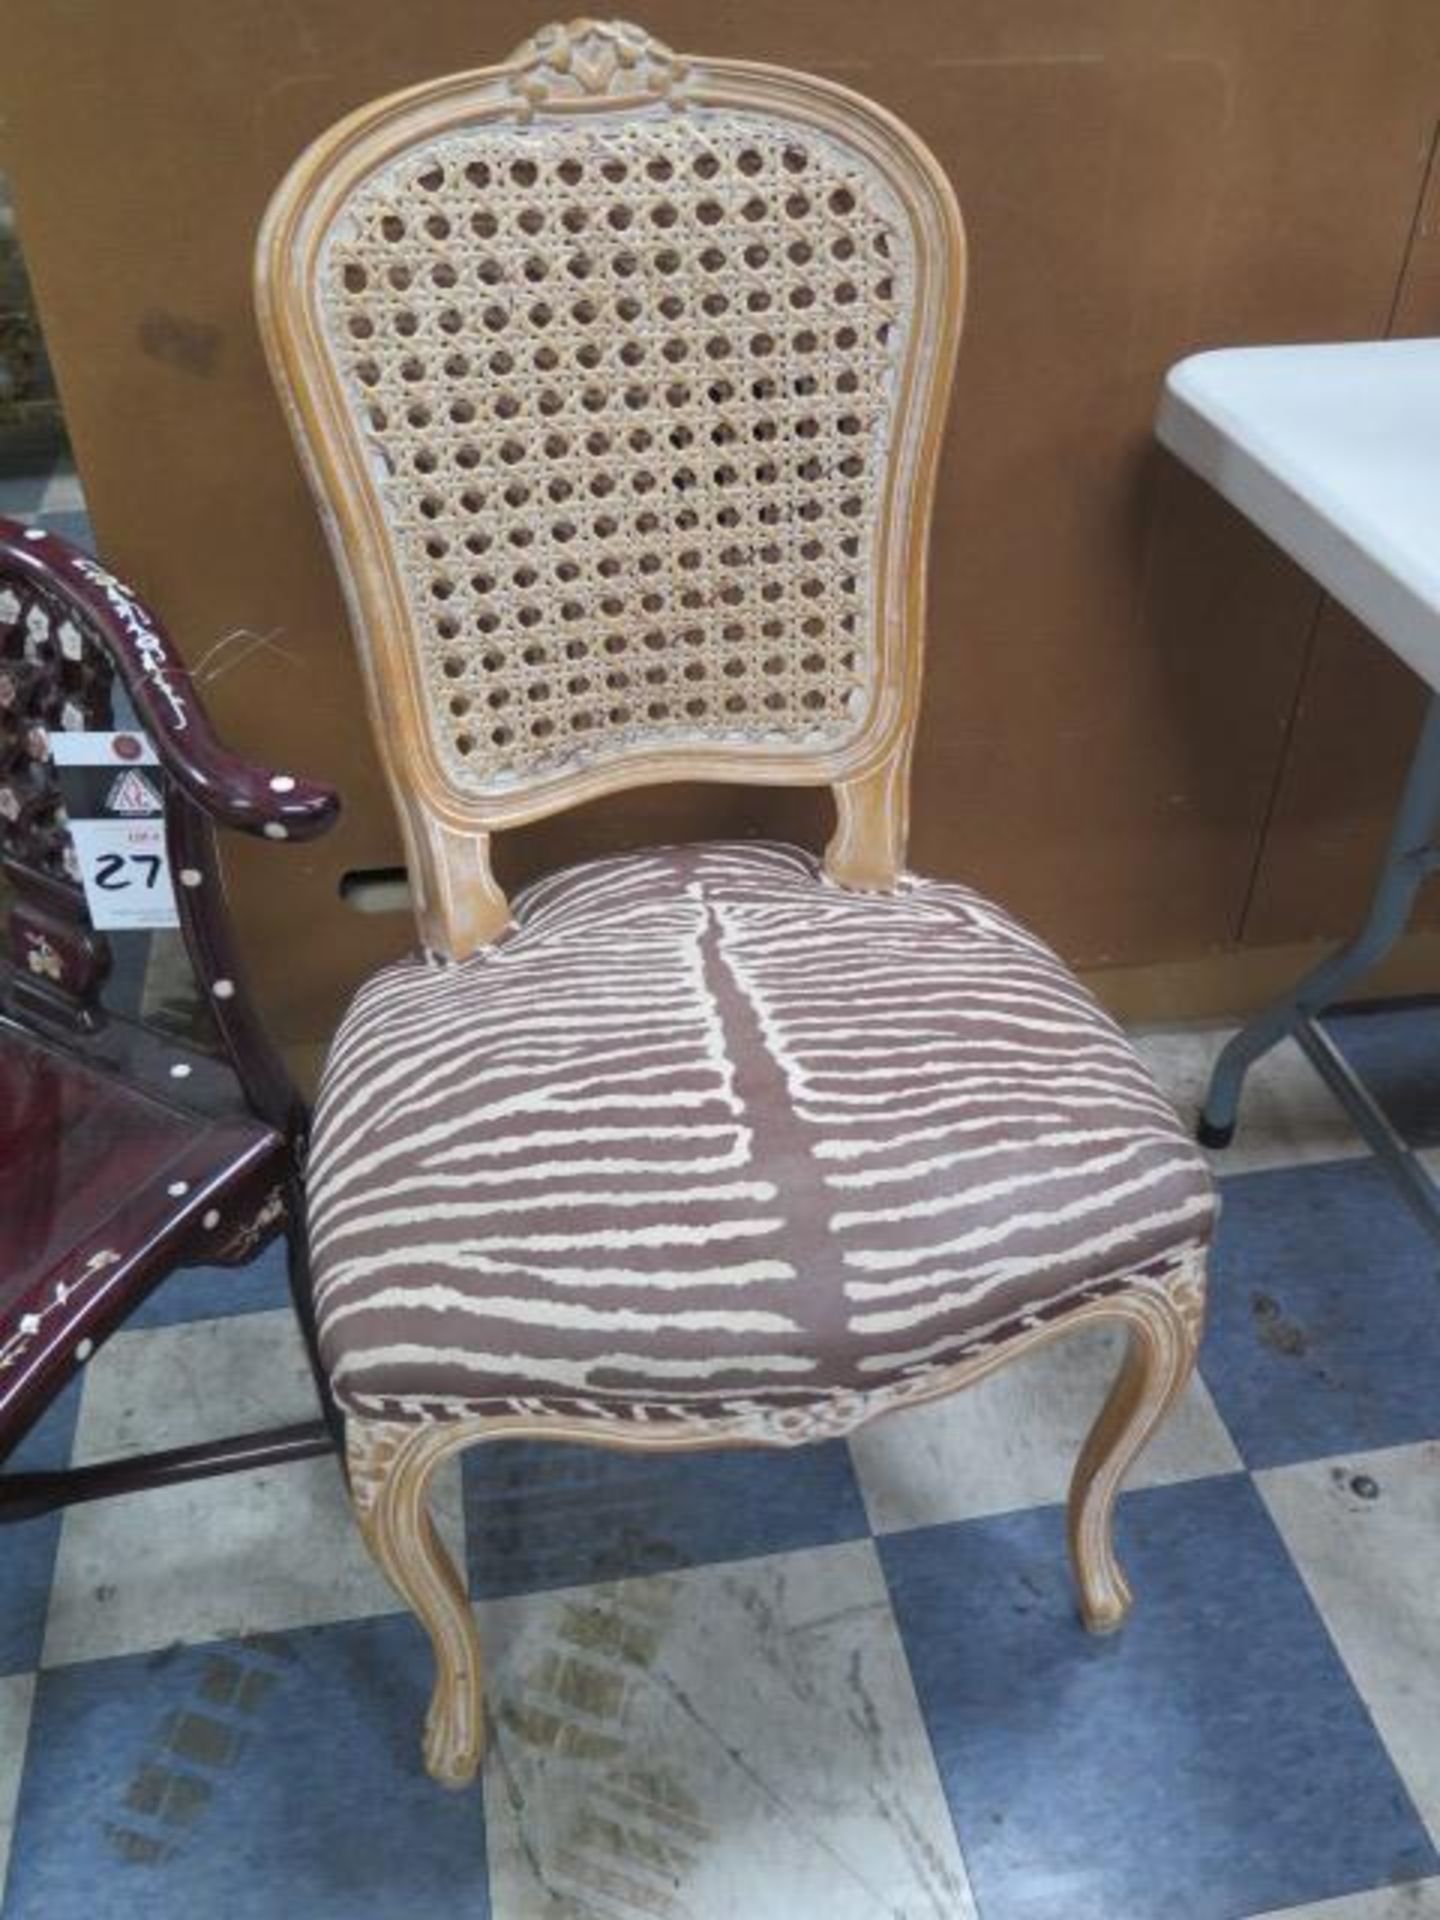 Vintage Corner Chair w/ Mother of Pearl Inlays and Vintage Style French Cane Back Chair (SOLD AS-IS - Image 8 of 10